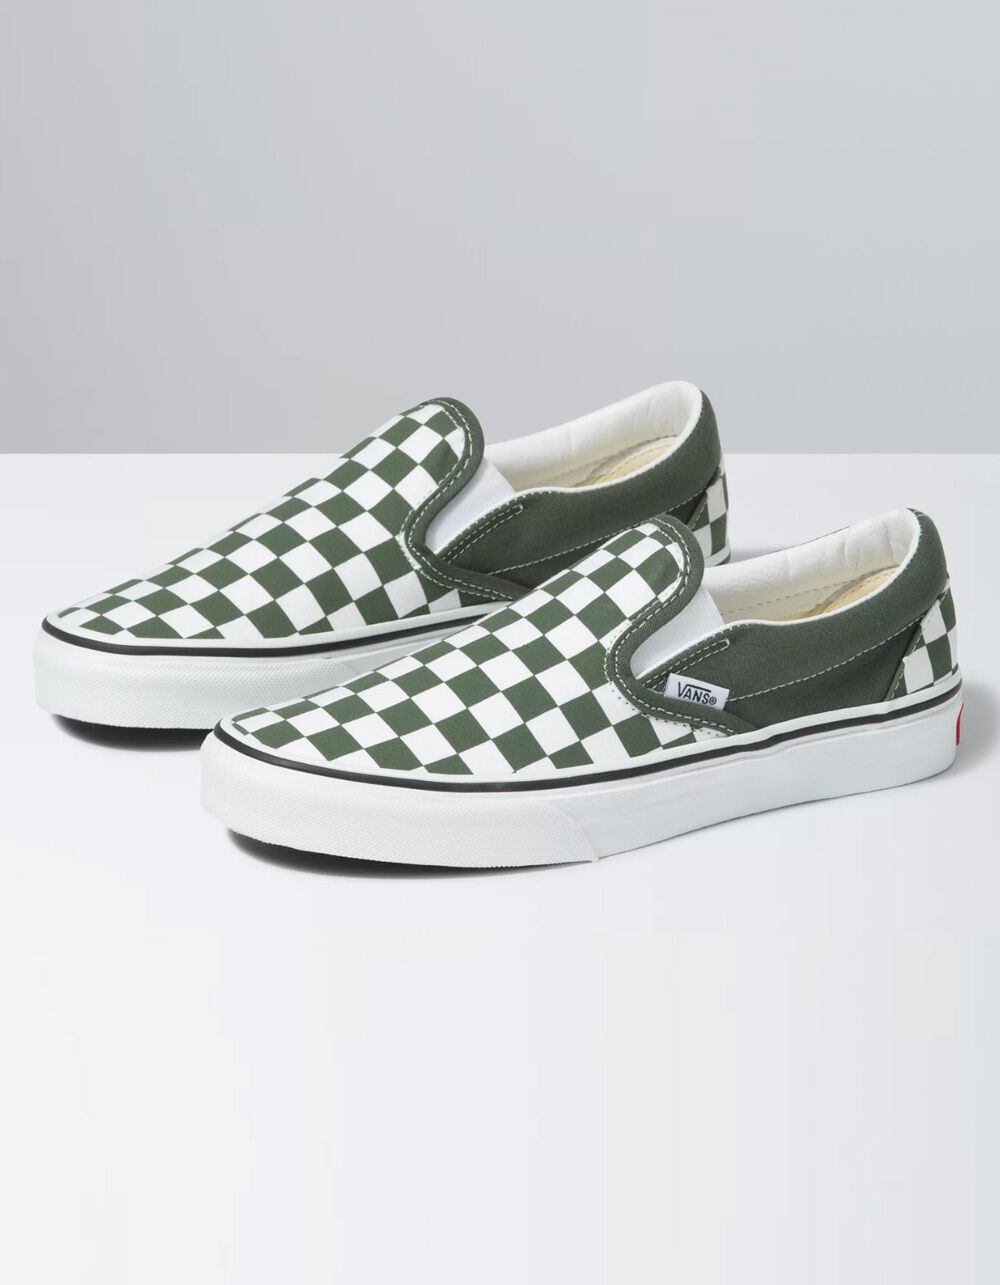 VANS Checkerboard Classic Womens Slip On Shoes - OLIVE | Tillys